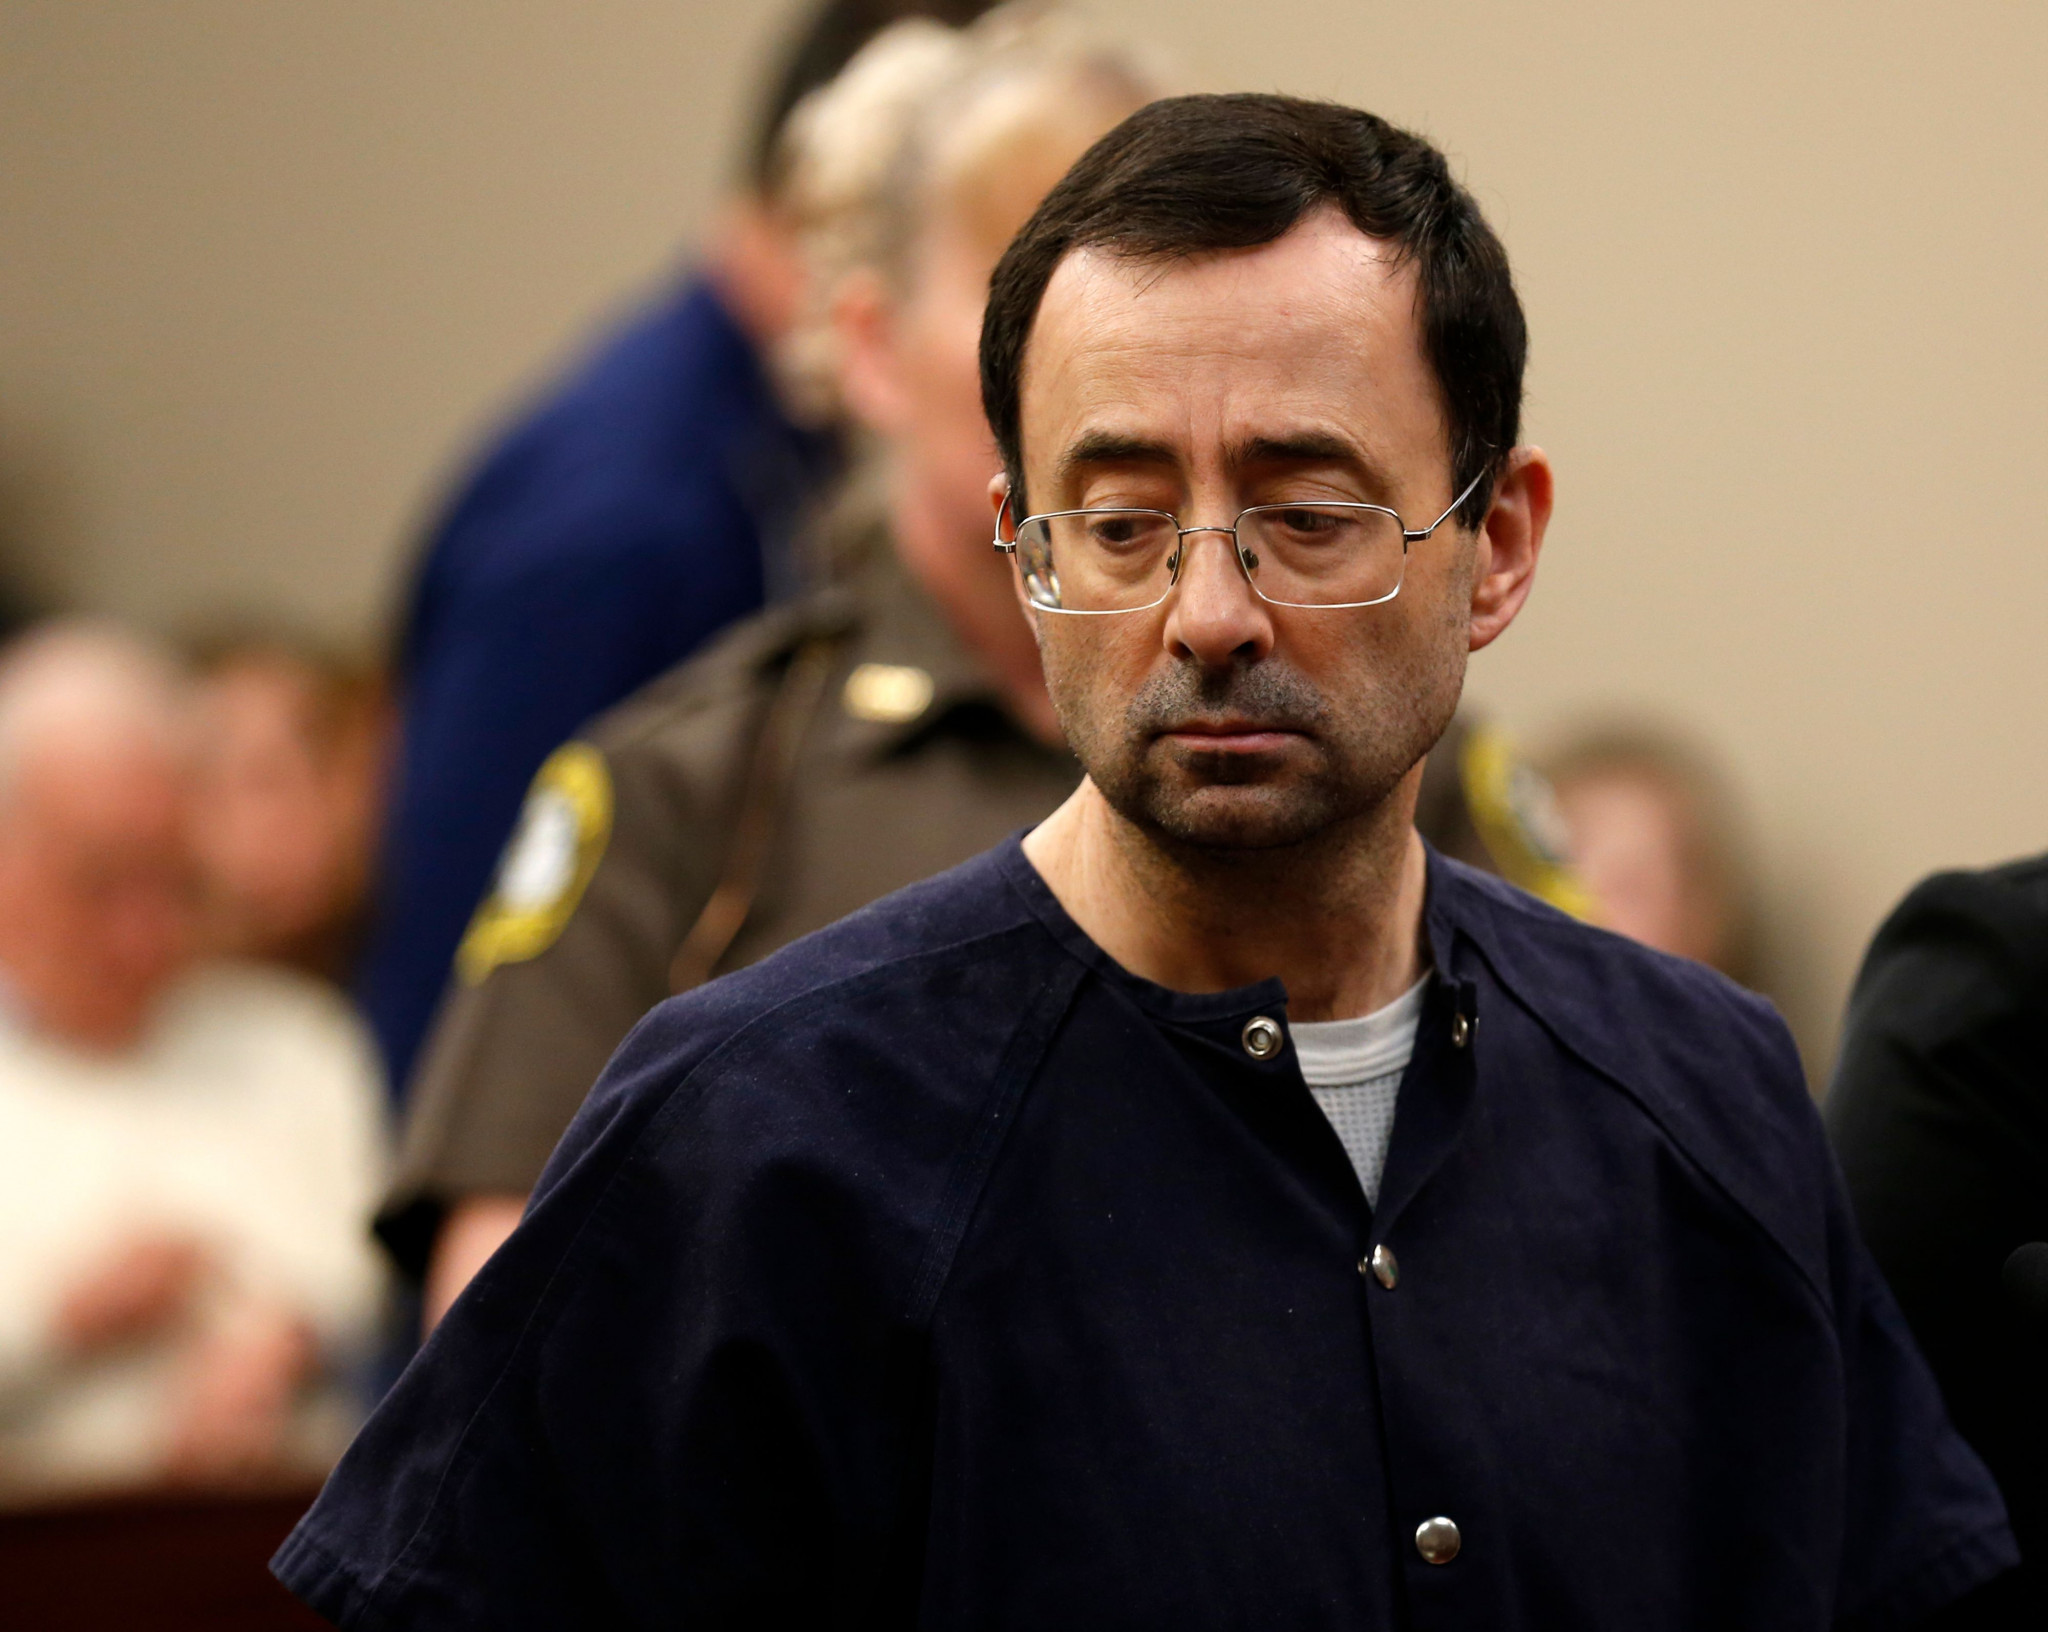 Larry Nassar has been sentenced to 40 to 175 years in prison ©Getty Images